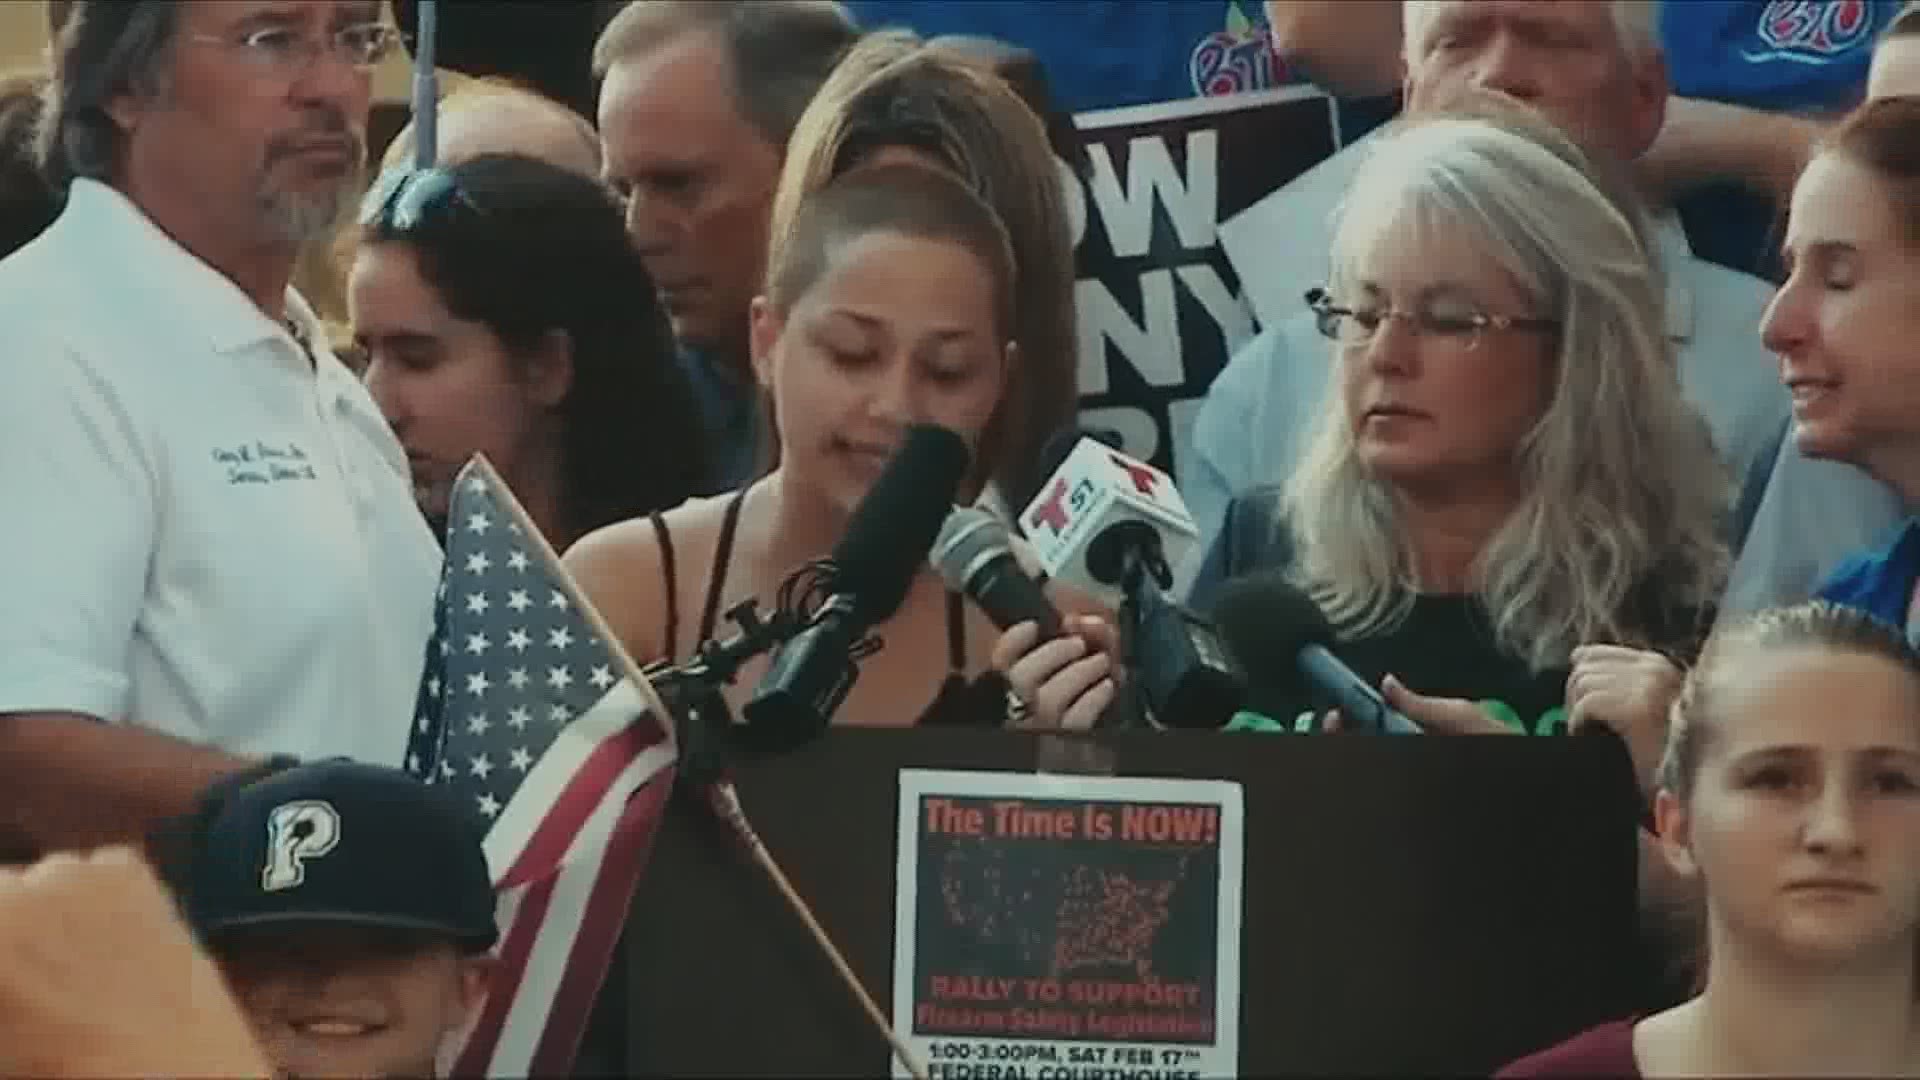 Emma Gonzalez, one of the young activists who survived the Marjory Stoneman Douglas High School shooting, spoke at the Democratic National Convention.